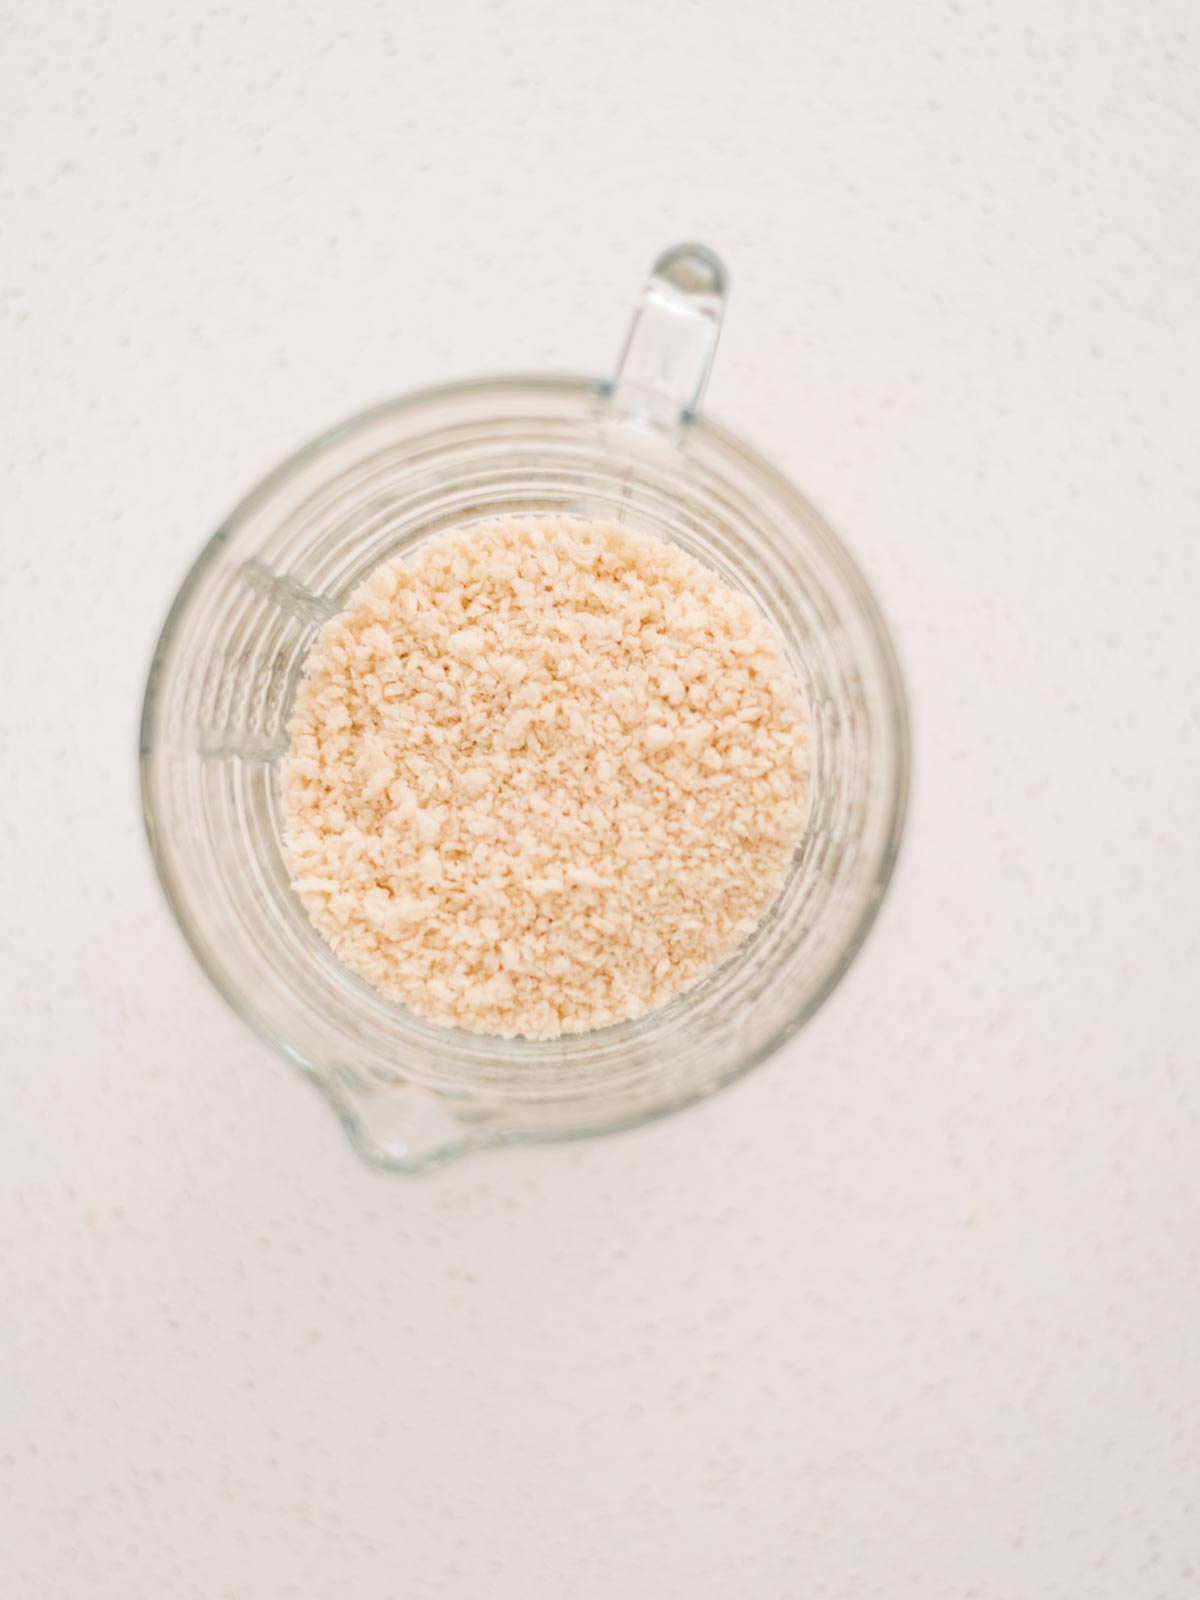 panko breadcrumbs in a measuring cup